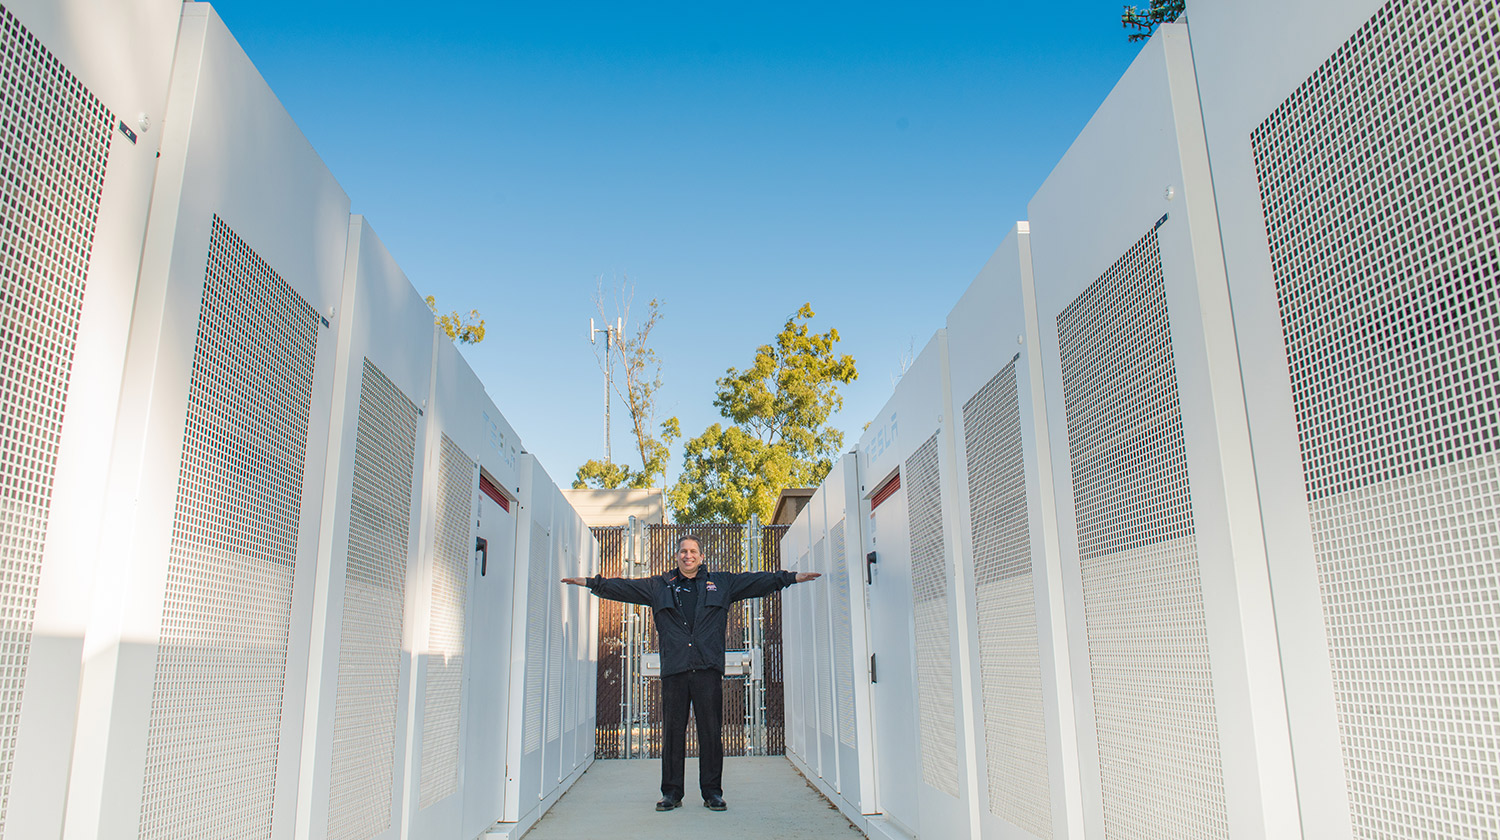 Kenny Seeton, Central Plant/energy manager at CSUDH, stands among 20 Tesla battery banks installed on campus to help reduce the university’s impact on the local power grid.